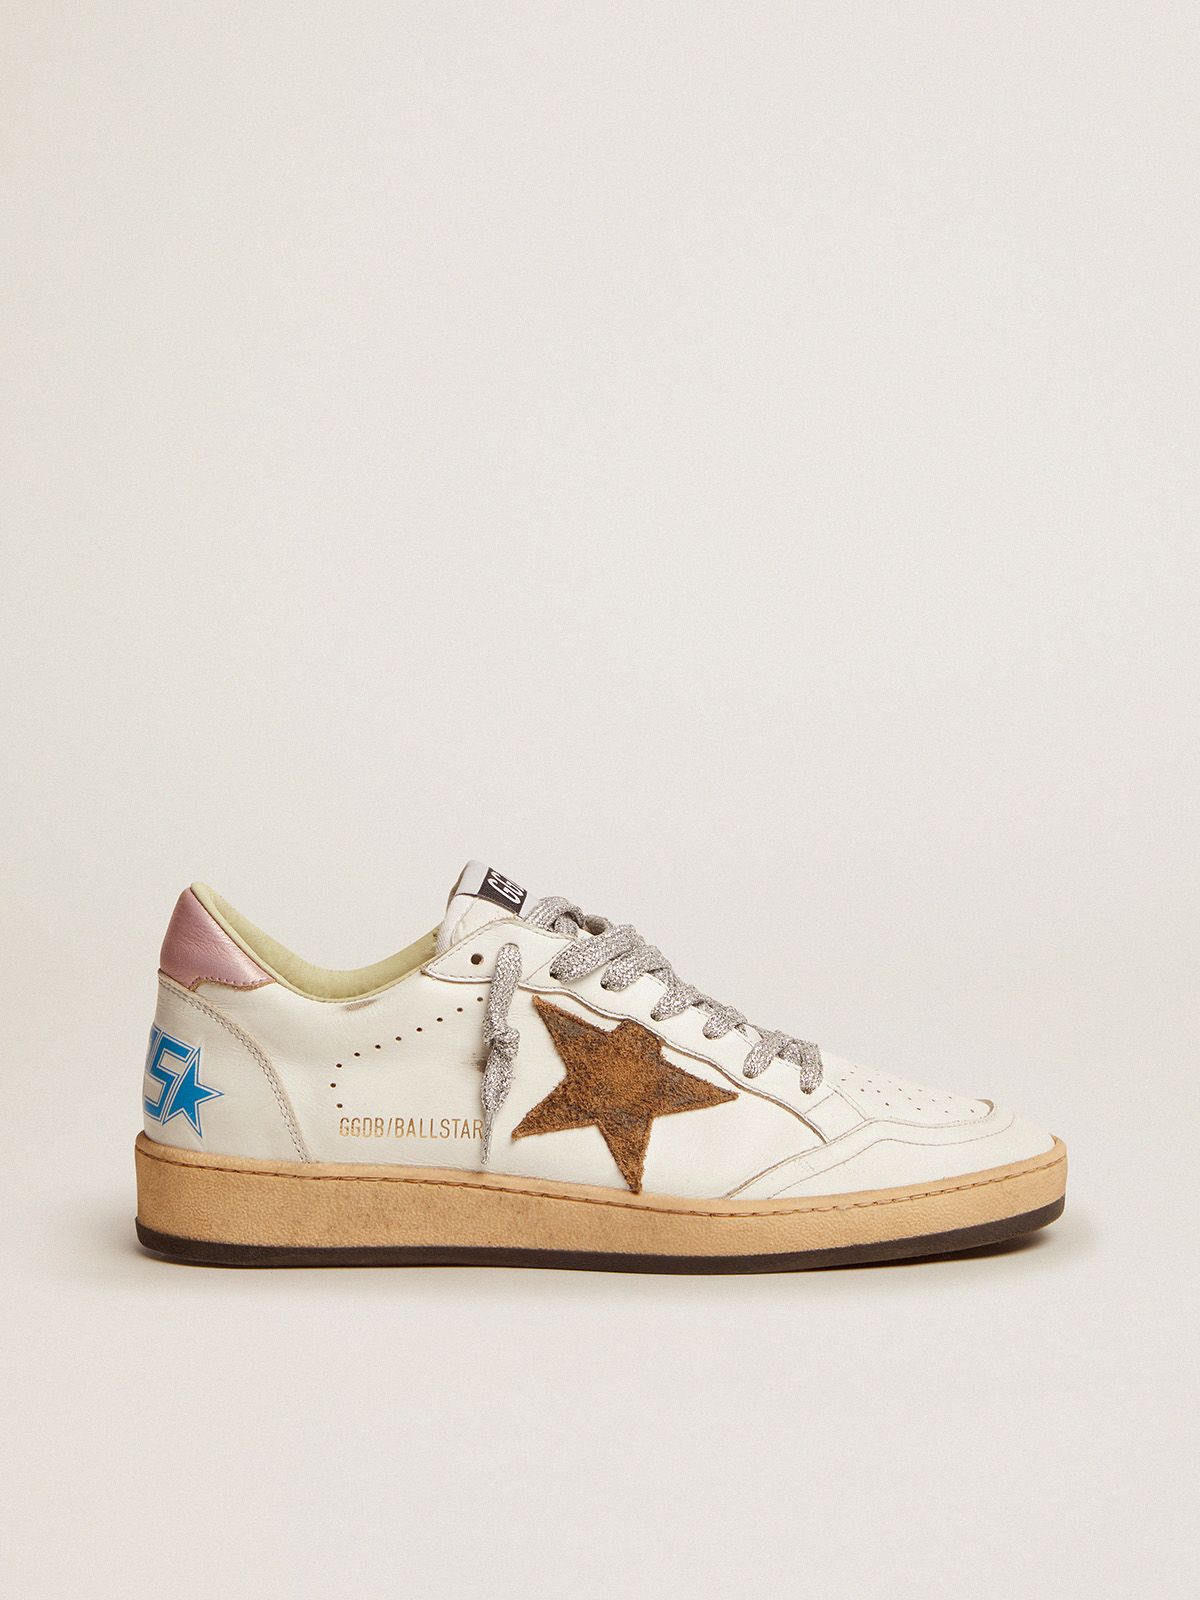 Ball Star sneakers with leopard-print star and pink laminated 